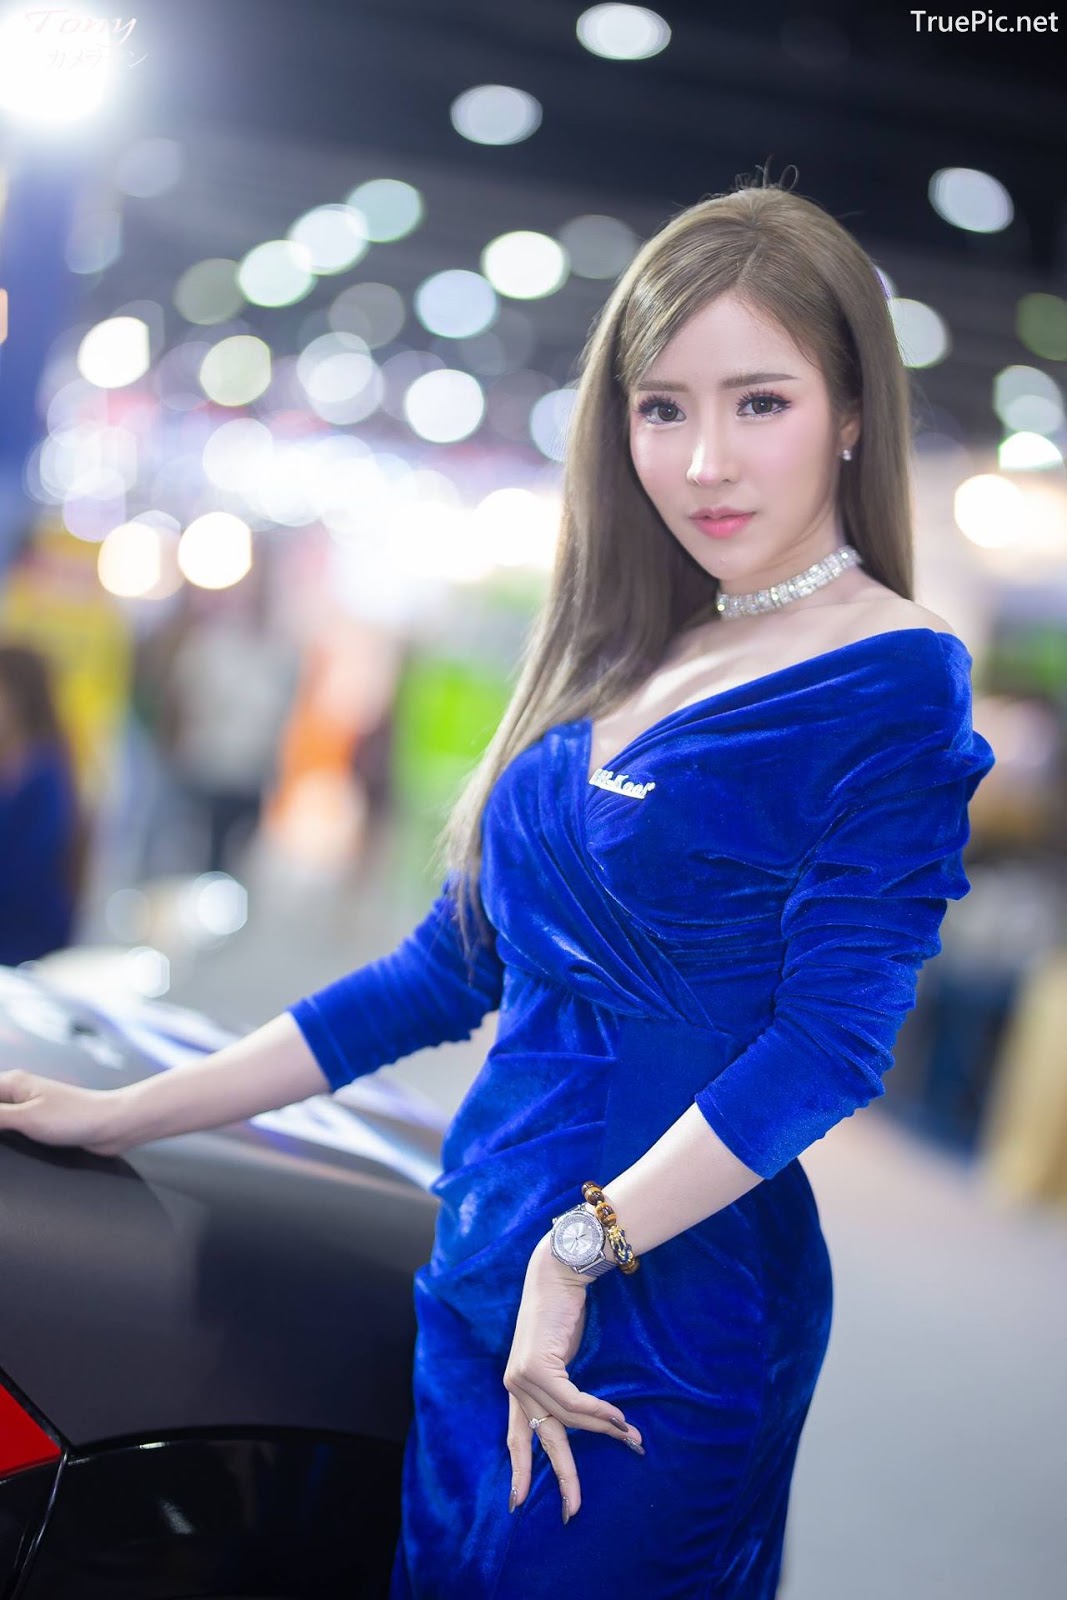 Image-Thailand-Hot-Model-Thai-Racing-Girl-At-Motor-Expo-2018-TruePic.net- Picture-103